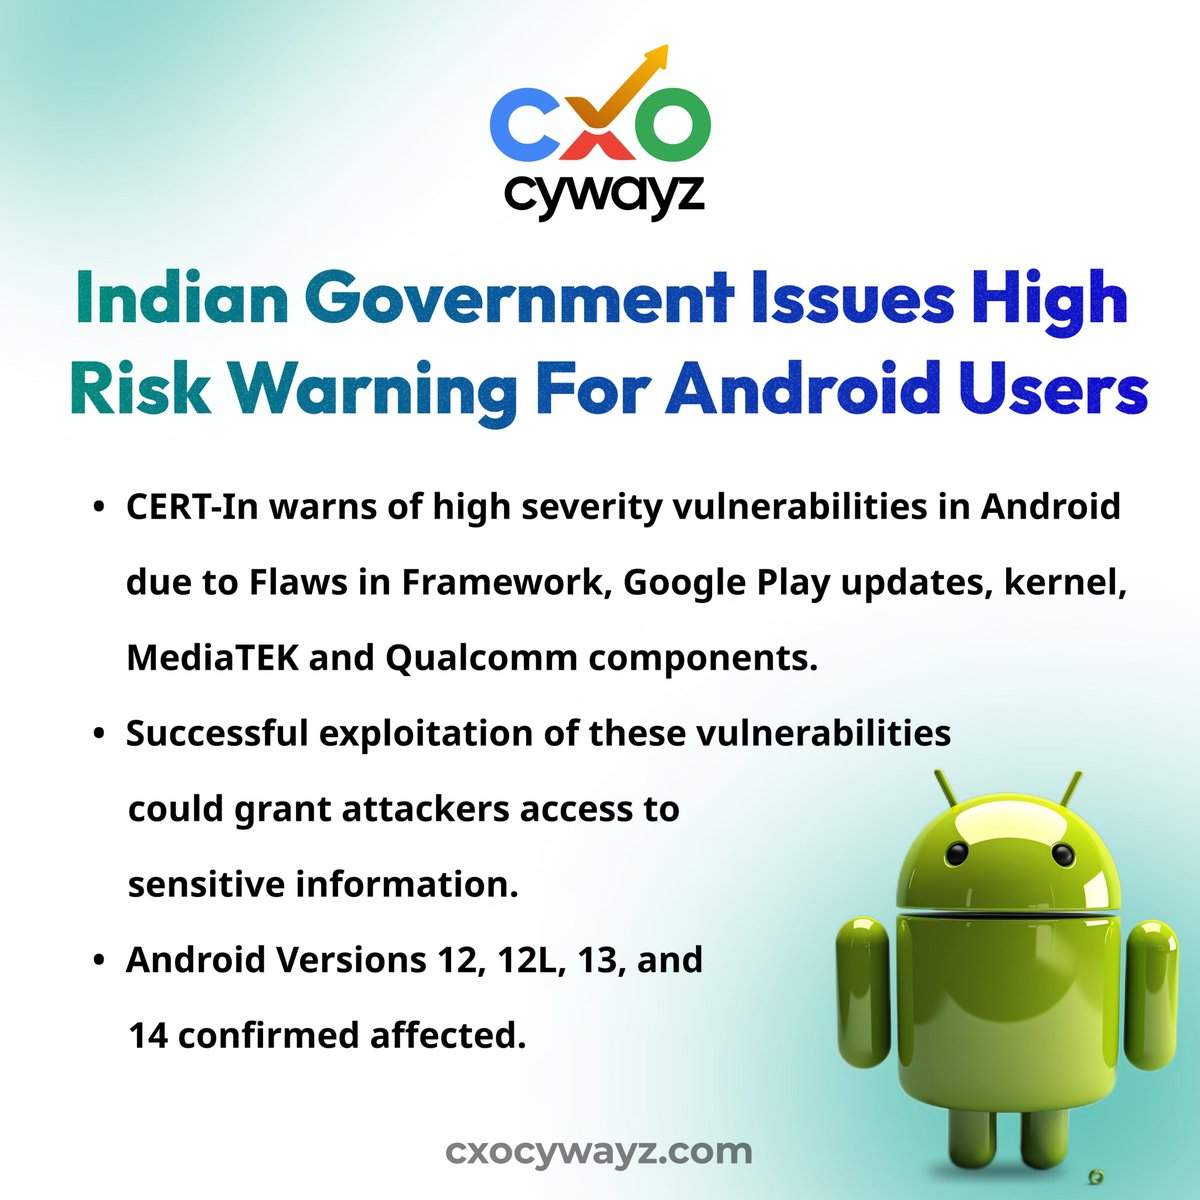 High-Risk Alert for Android Users 
#Android #Google #Play #Arm #MediaTek #Qualcomm #CyberSecurity #CERTIn #TechAlert #MobileSecurity #StaySafe #cxocywayz #cxo